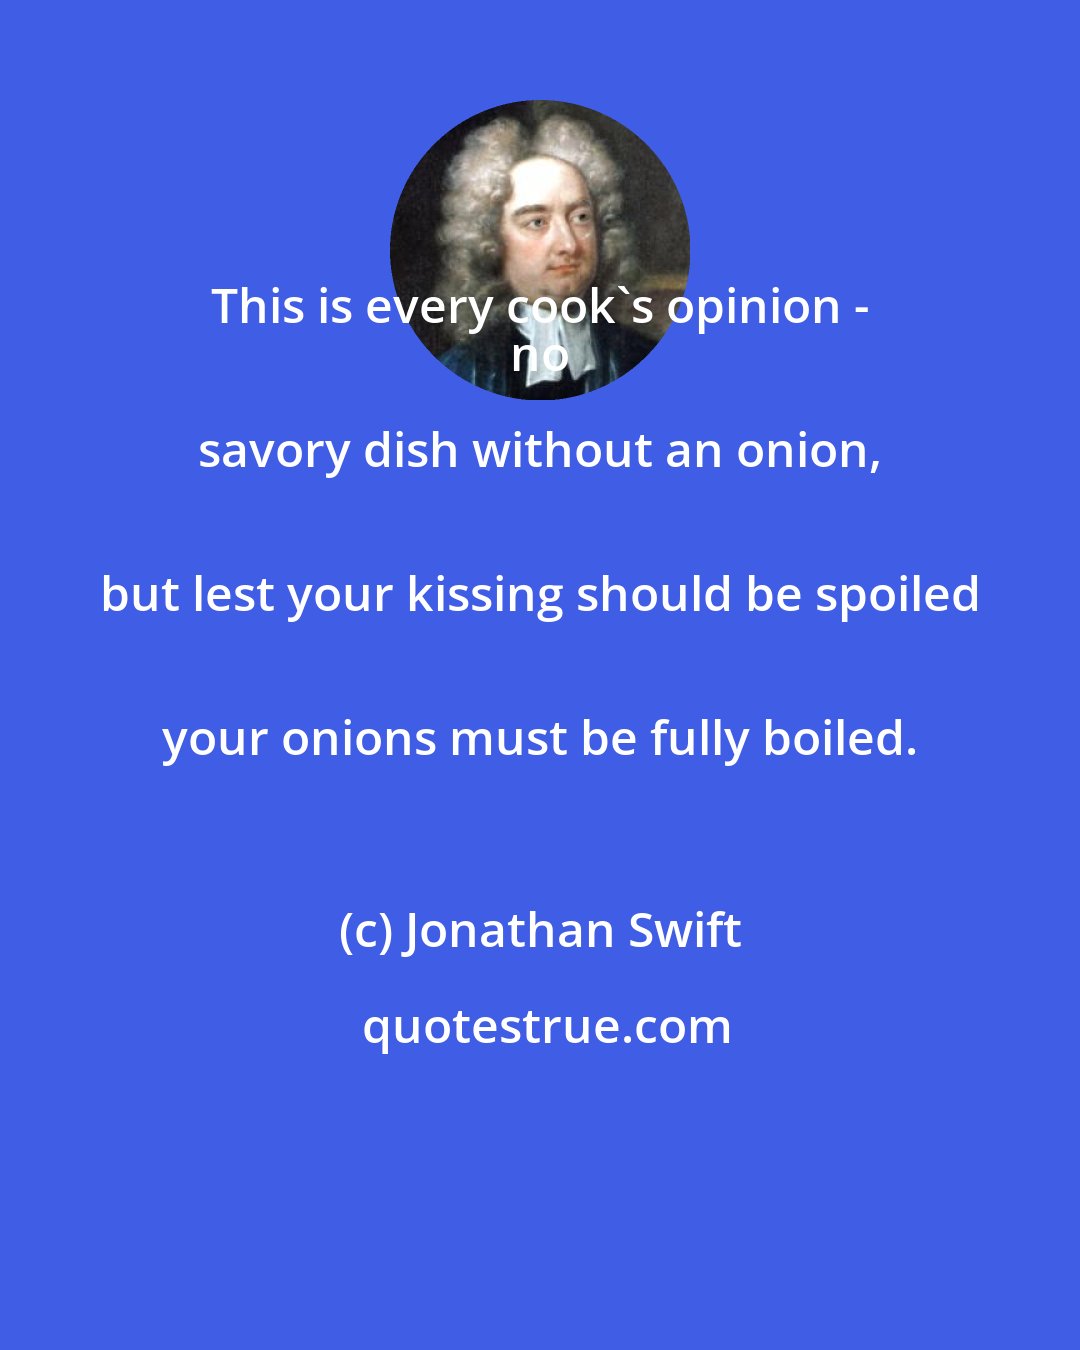 Jonathan Swift: This is every cook's opinion - 
 no savory dish without an onion, 
 but lest your kissing should be spoiled 
 your onions must be fully boiled.